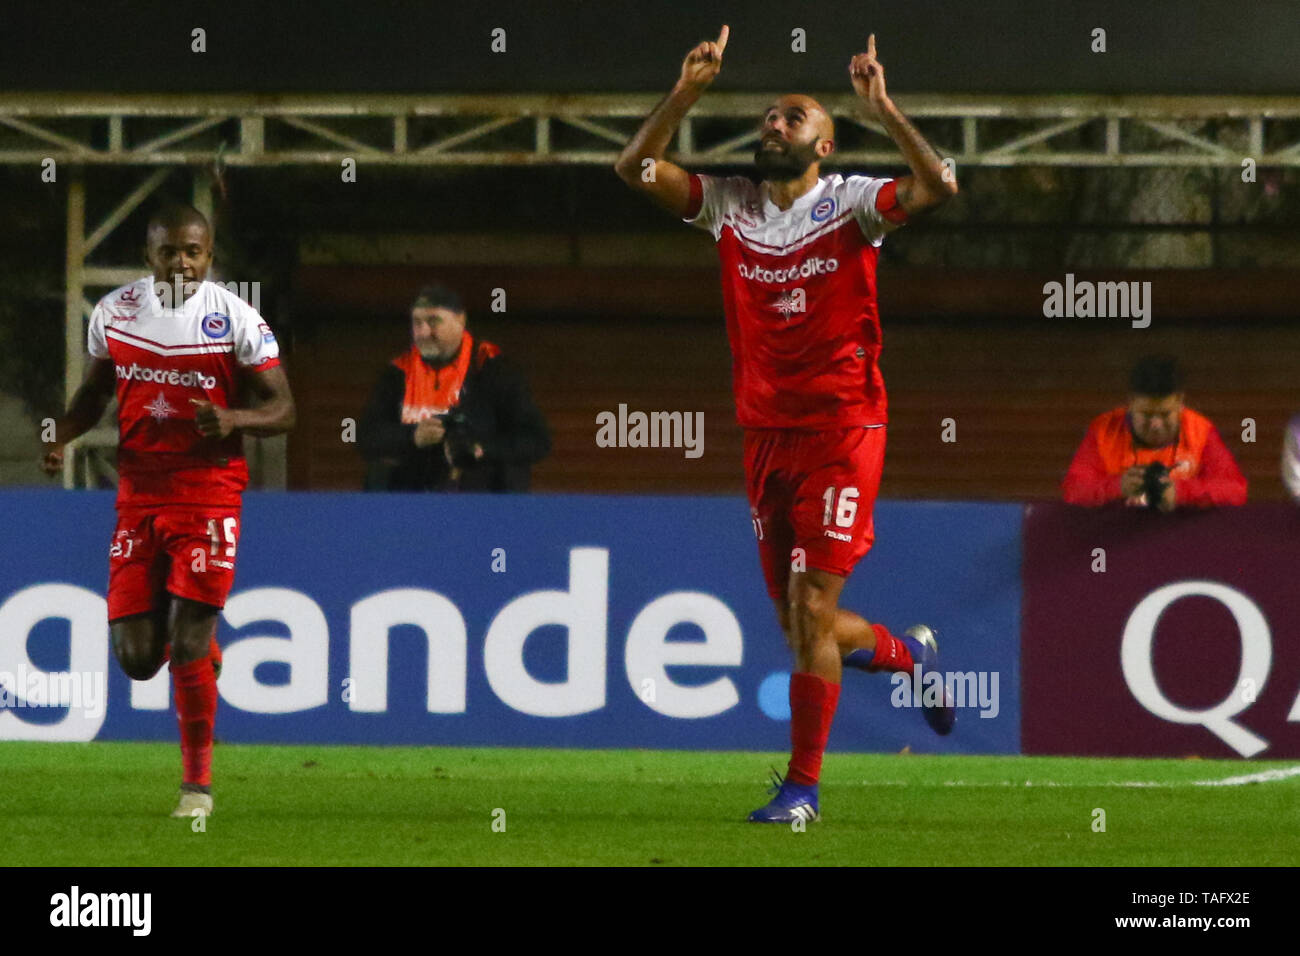 BUENOS AIRES, 23.05.2019: Carlos Quintana celebrates his goal on aggregate time during the match between Argentinos Juniors and Deportes Tolima for th Stock Photo